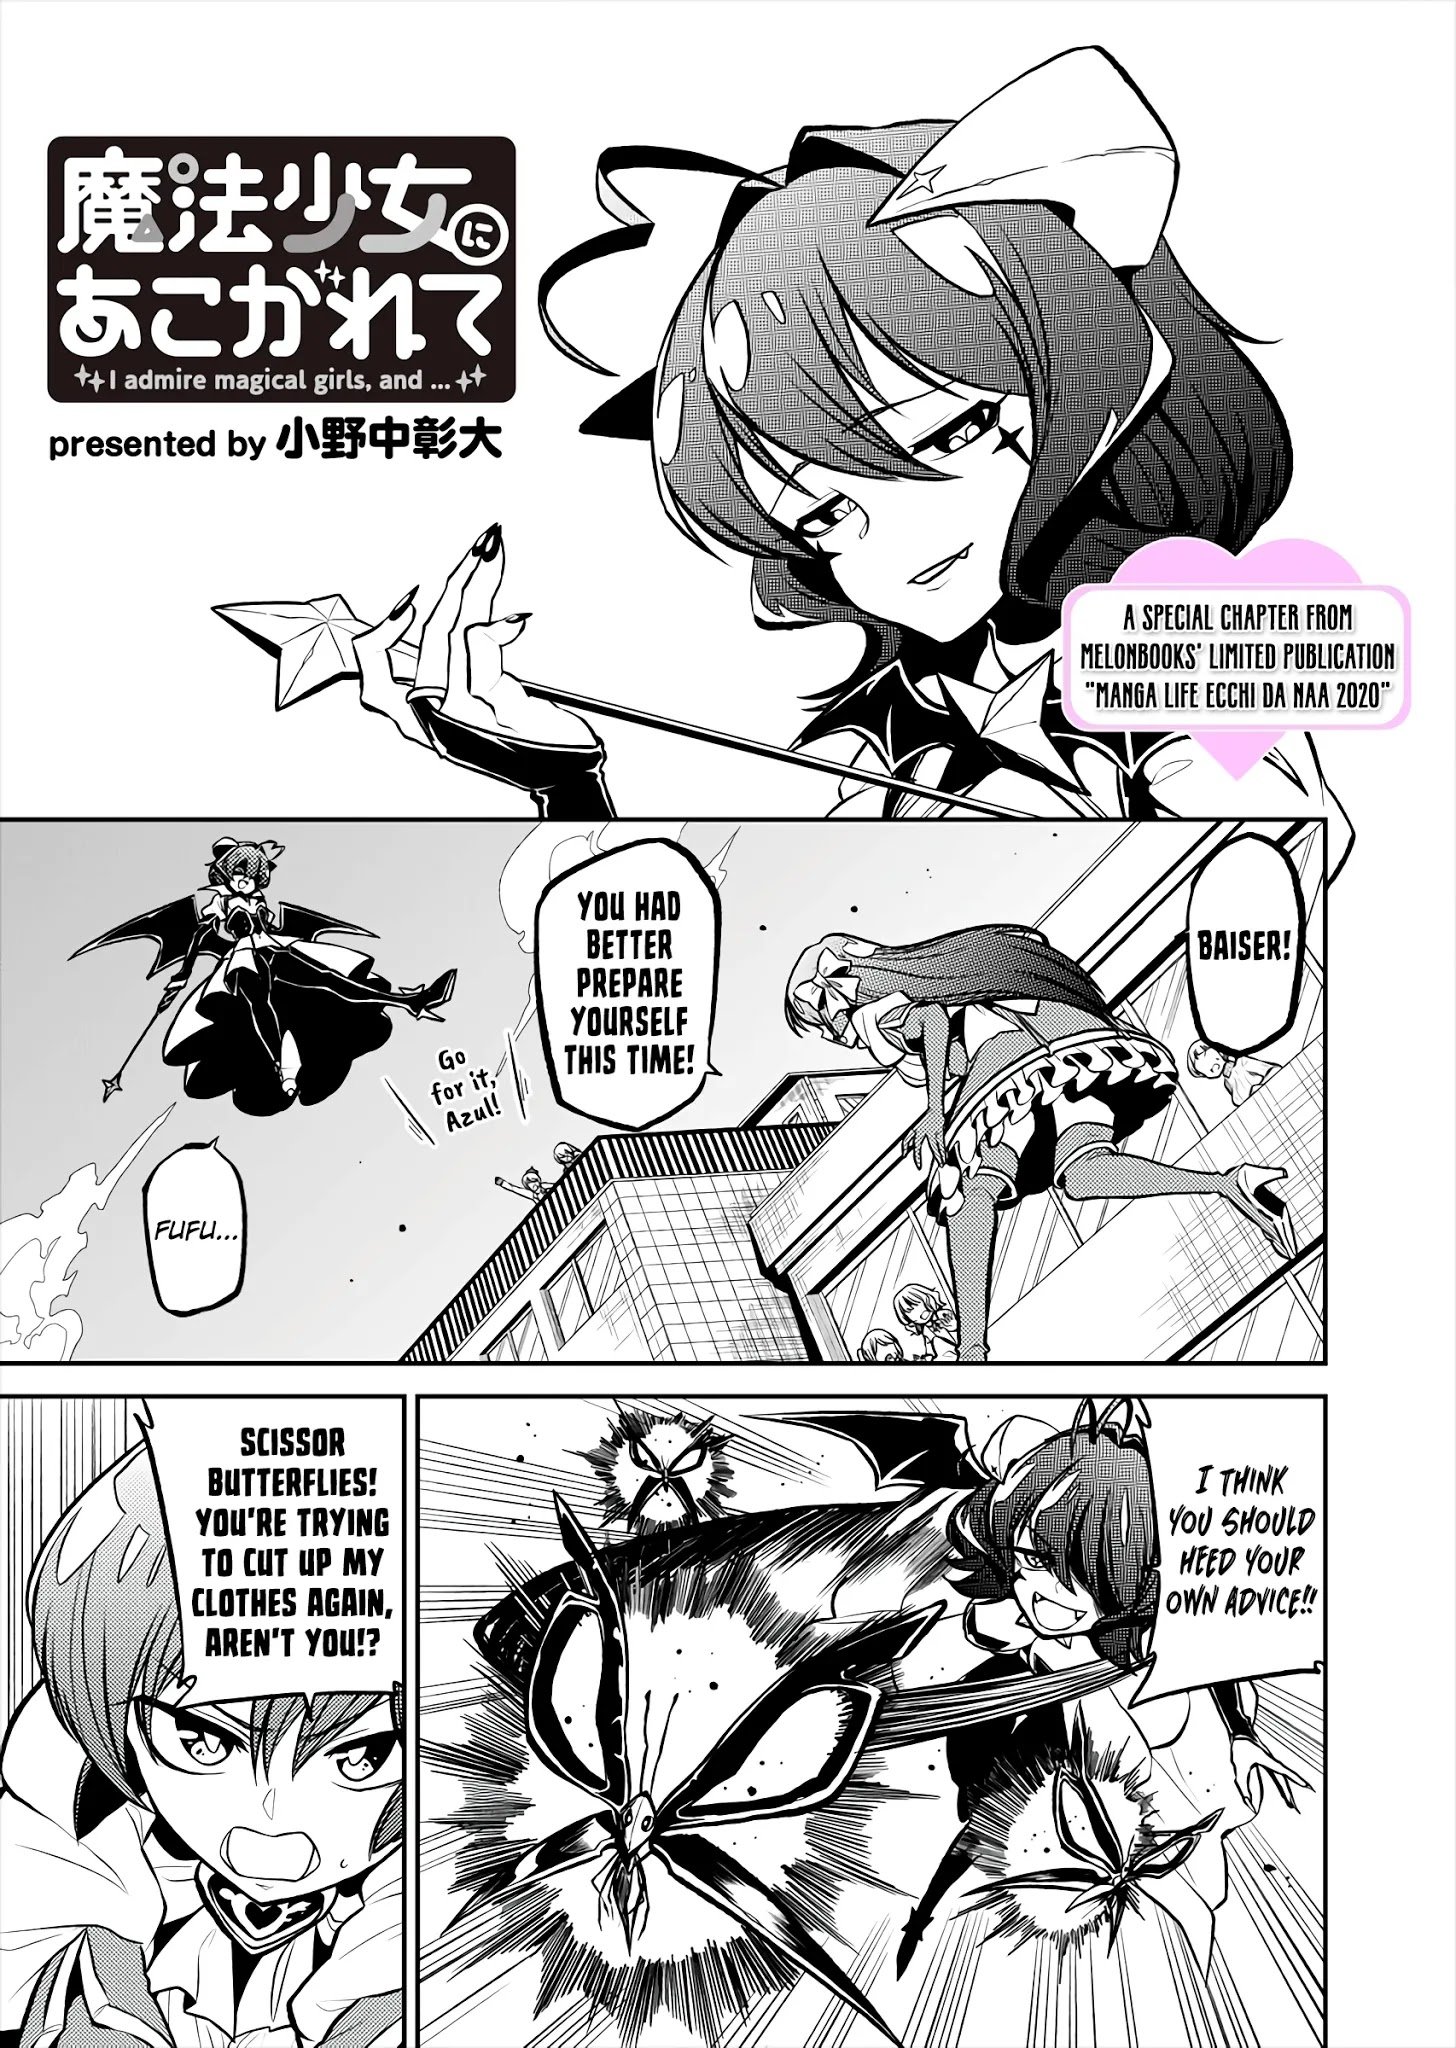 Looking up to Magical Girls - chapter 24.5 - #1